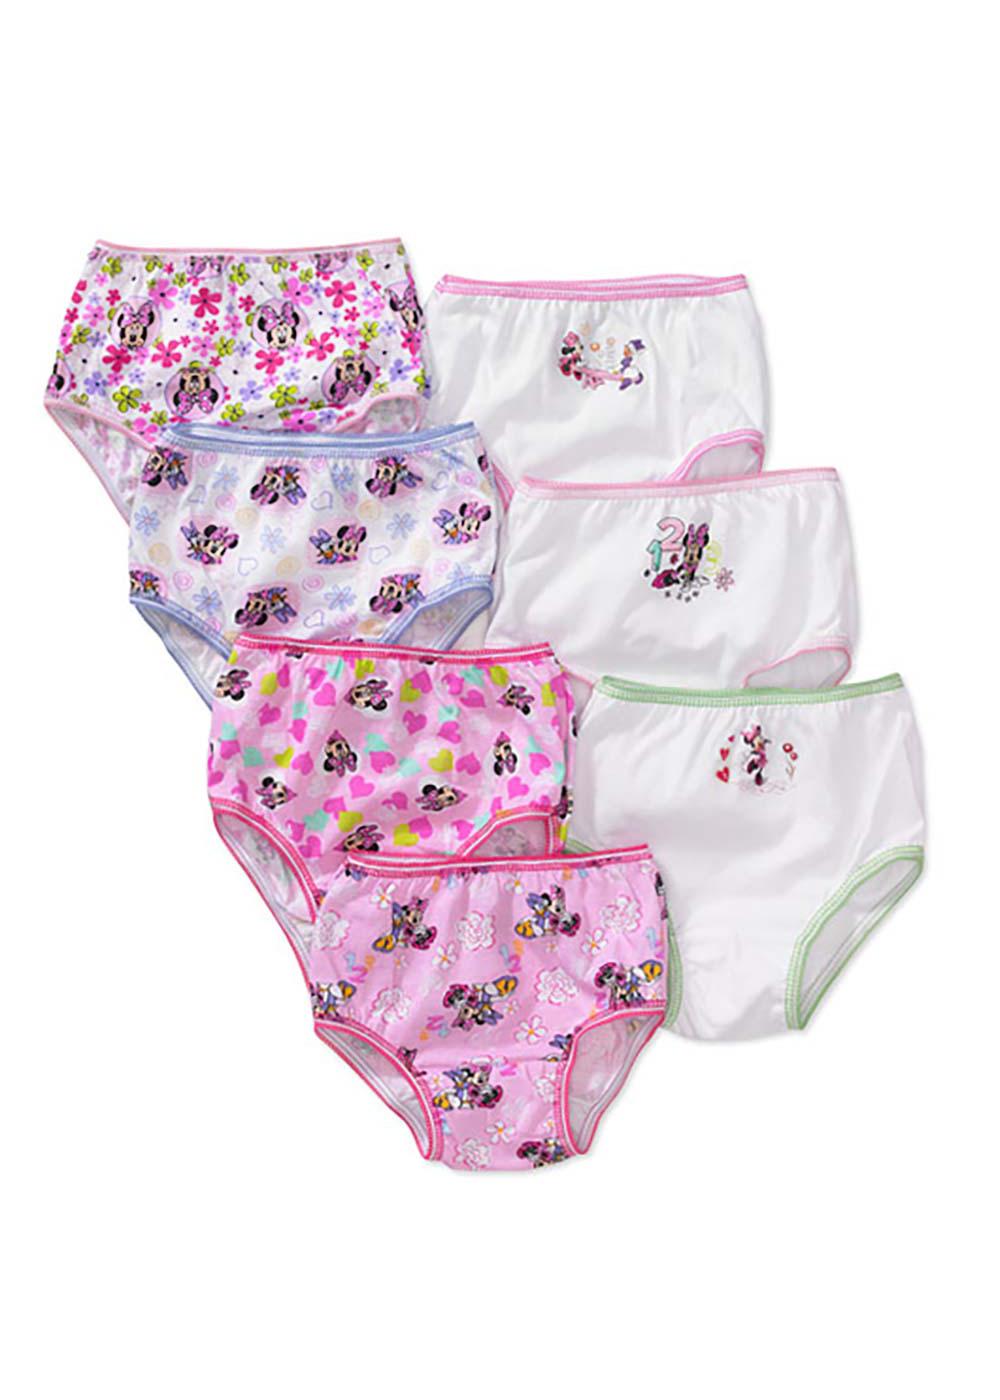 Handcraft Disney's Minnie Toddler Girls' Day of the Week Panty